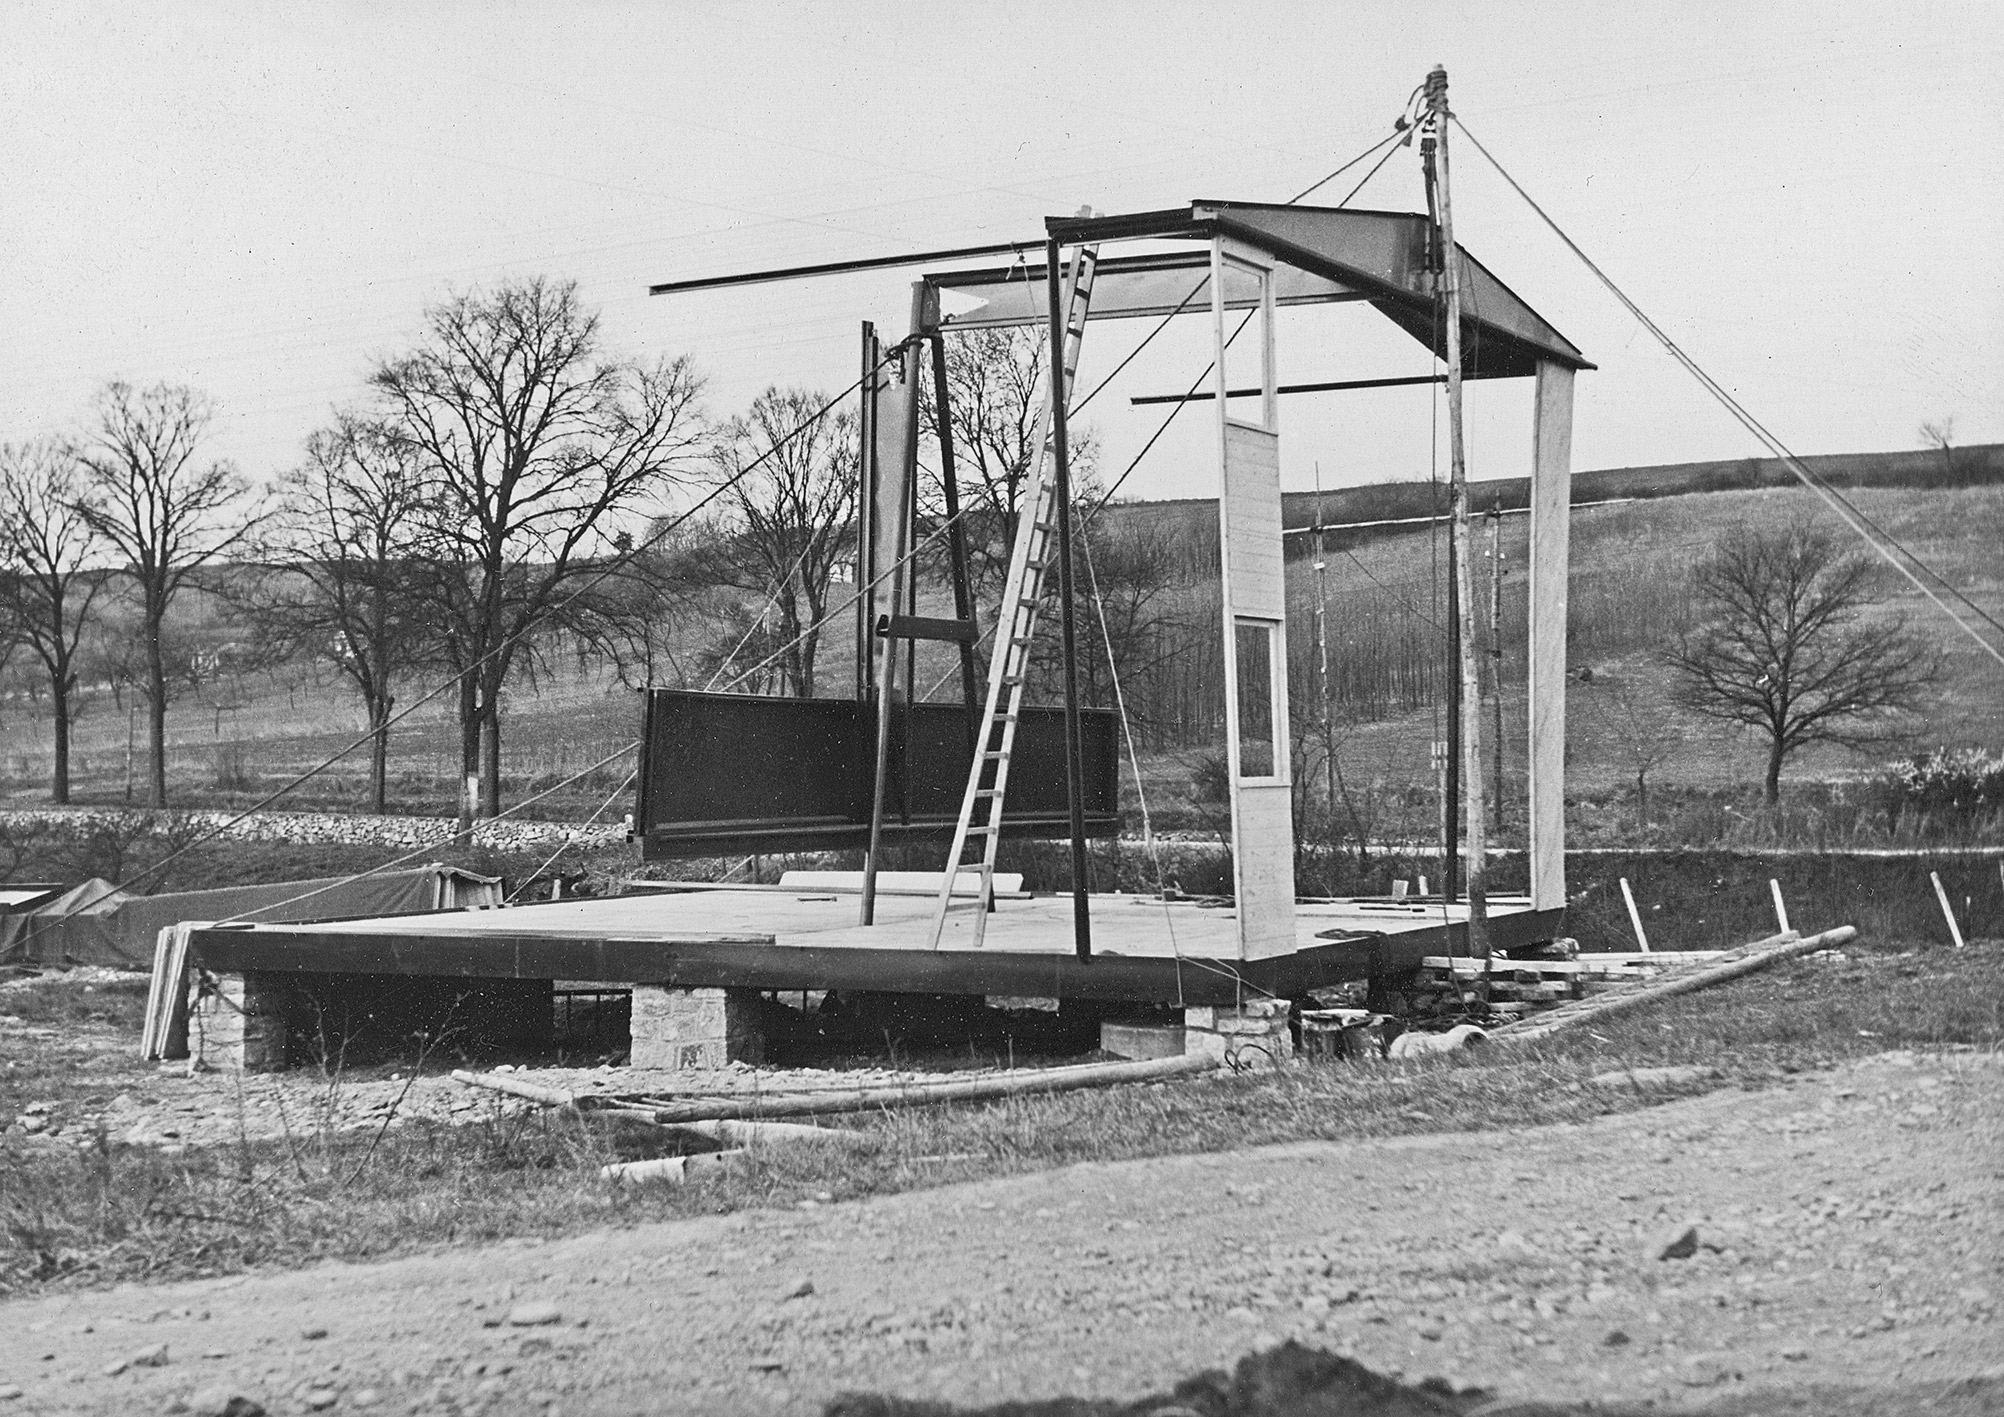 SCAL drafting pavilion. Constructive system Jean Prouvé, Pierre Jeanneret, architect.  Assembly of the design and management office, Issoire, March–April 1940.